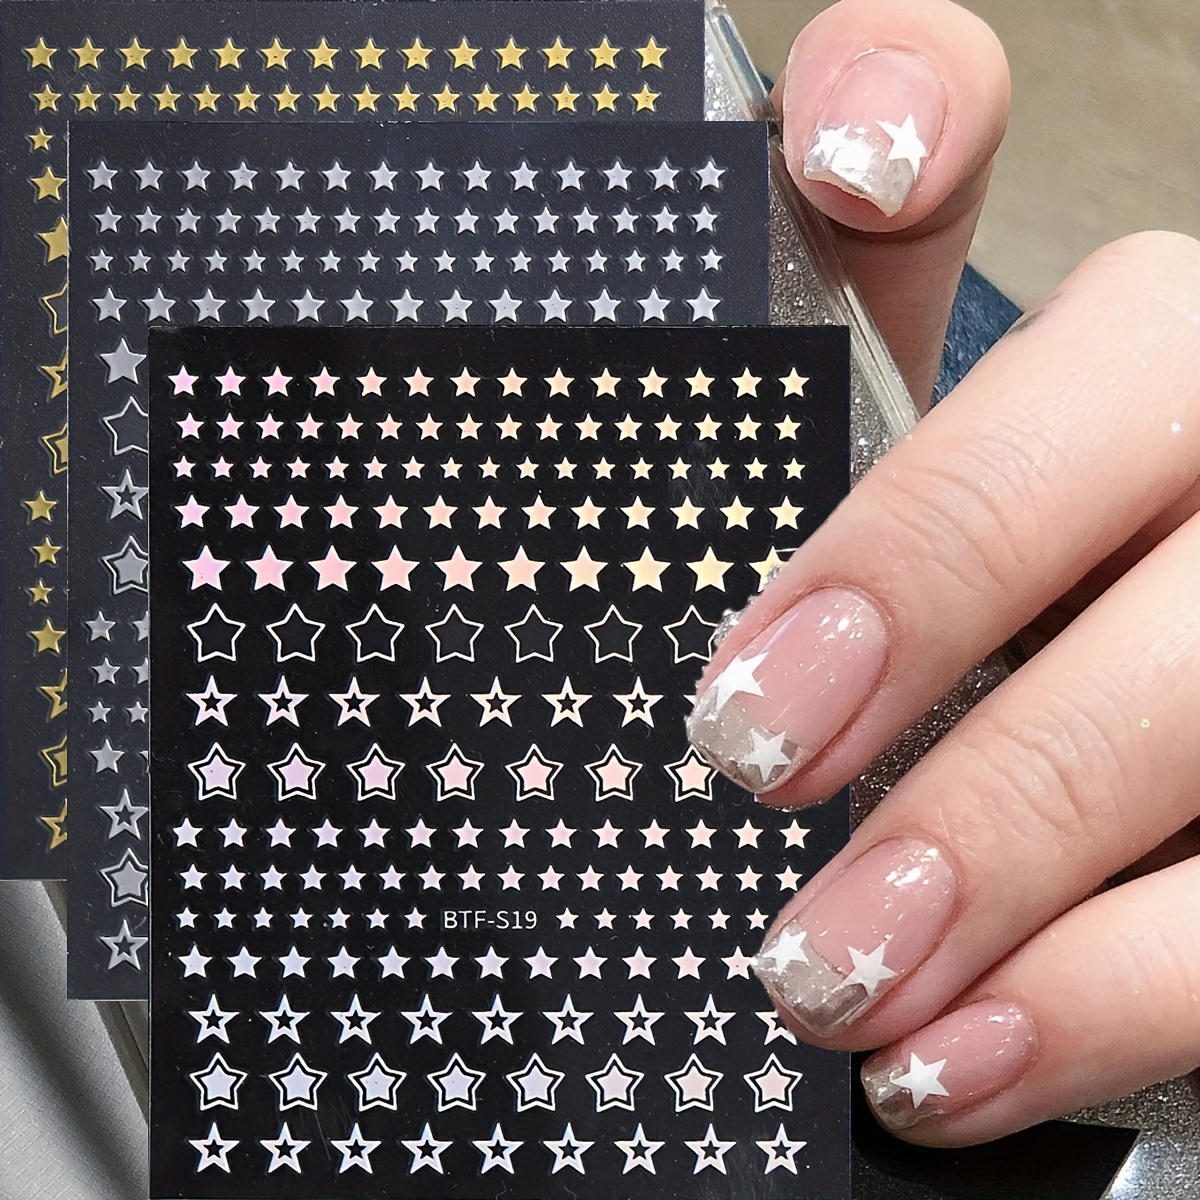 Gold Nail Foil Transfer Stickers Nail Art Supplies Holographic Laser Star  Moon Flower Heart Abstract Face Designer Nail Stickers 3D Glitter Line DIY